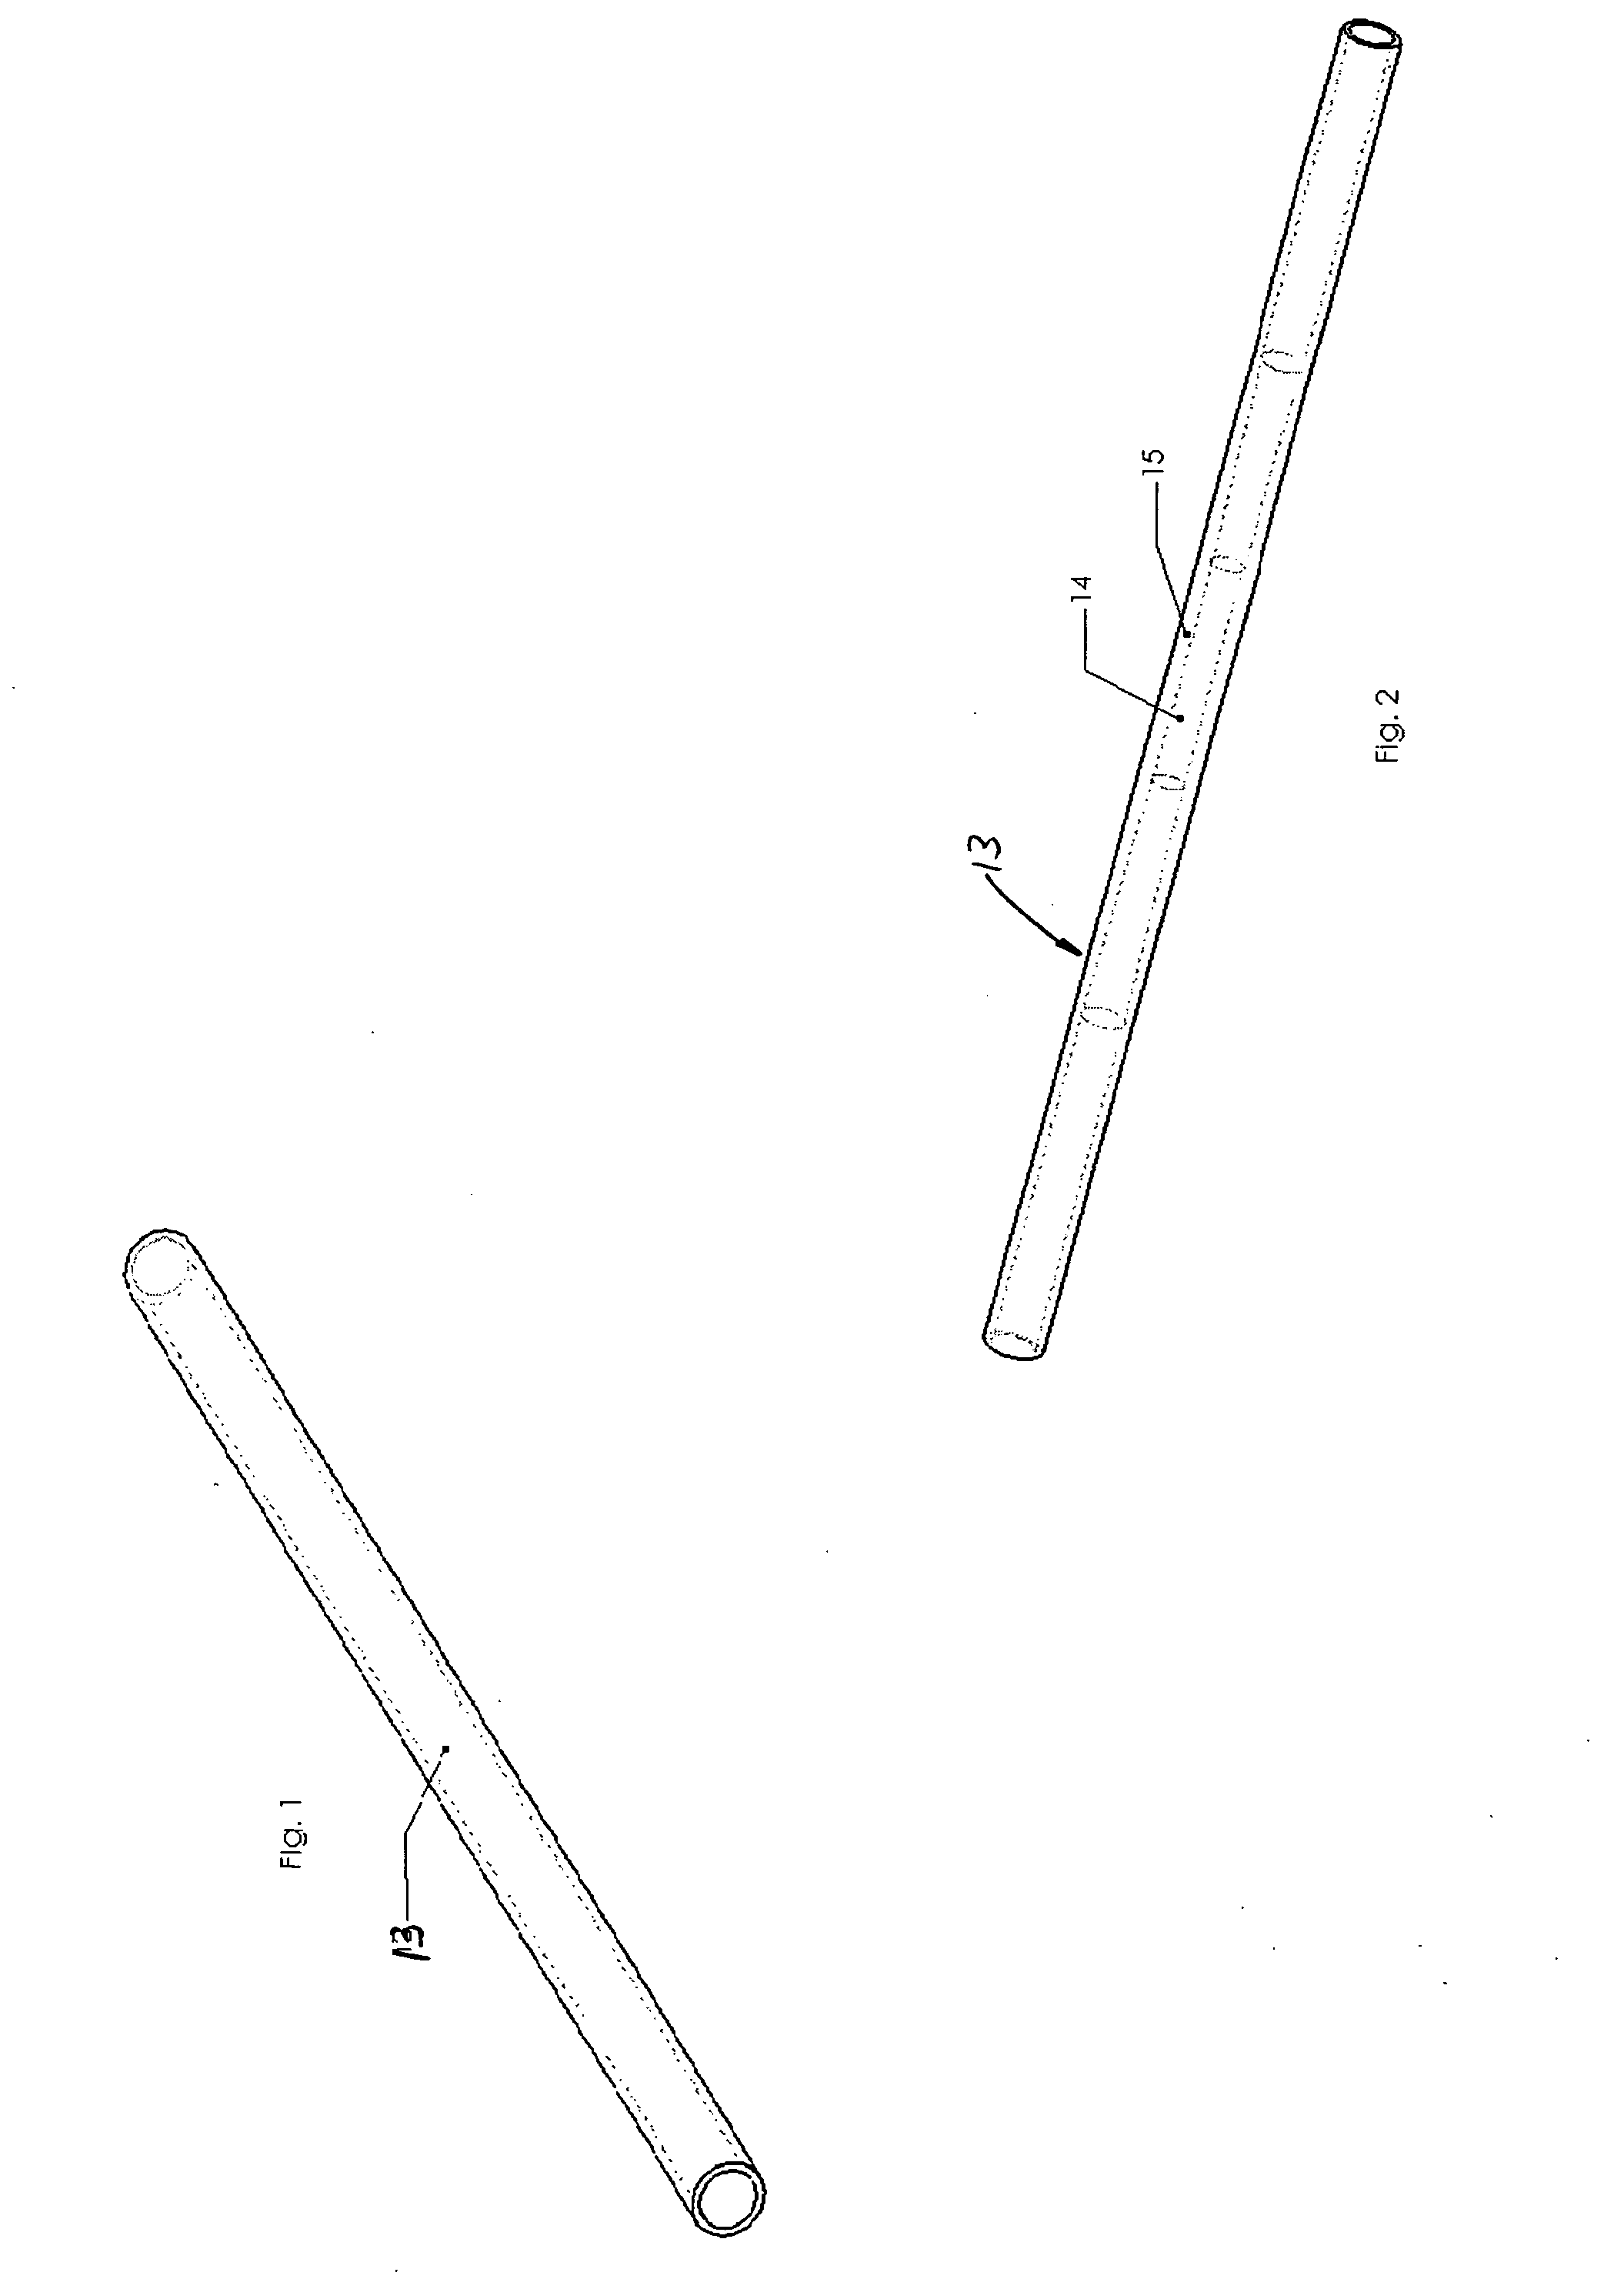 Peripheral artery medical device durability tester and method